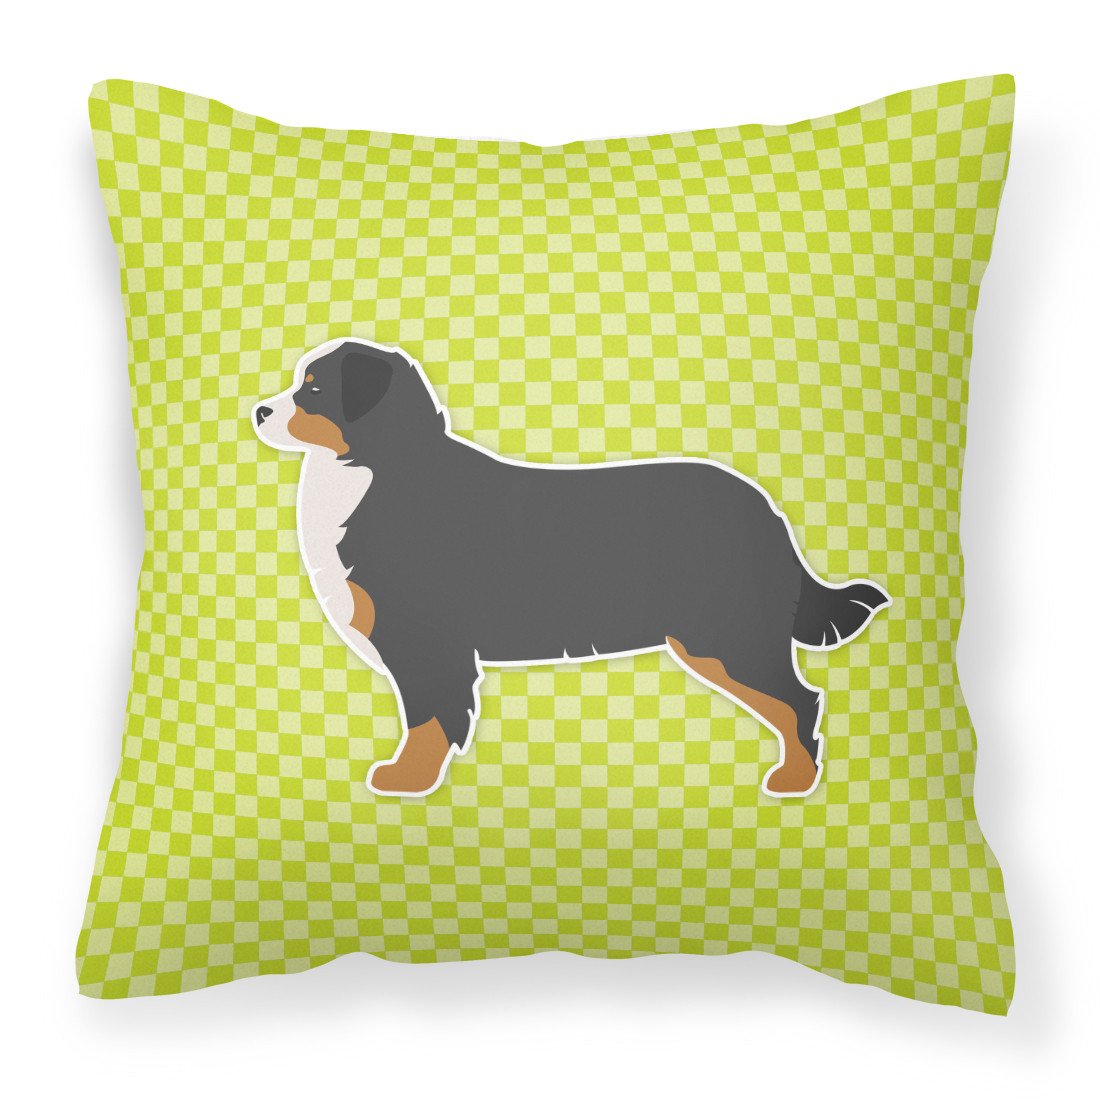 Bernese Mountain Dog Checkerboard Green Fabric Decorative Pillow BB3819PW1818 by Caroline's Treasures